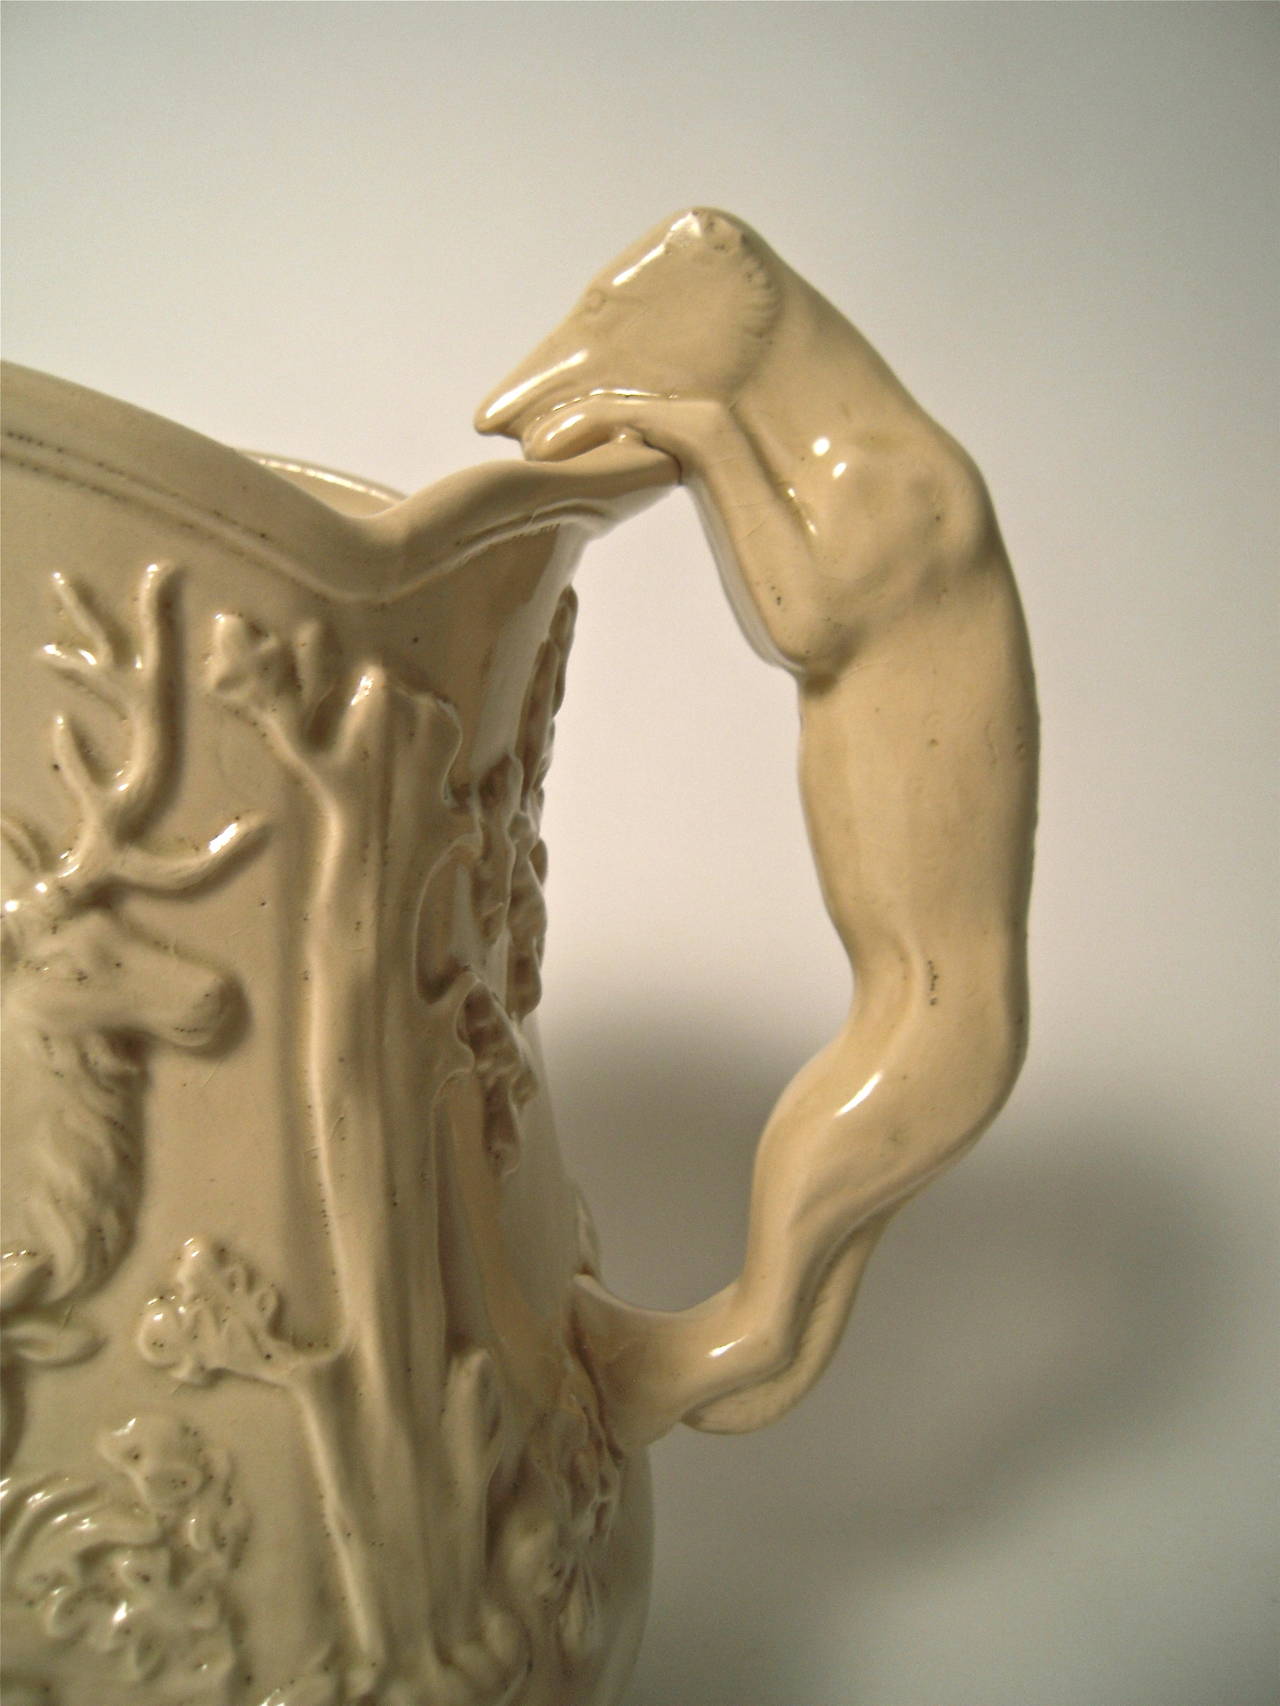 A large 19th century American yellow ware pottery hound-handled pitcher, made in the East Liverpool, Ohio potteries, with scalloped rim, the body decorated in relief with a stag and seated doe in a landscape, with a whimsical hound dog handle,